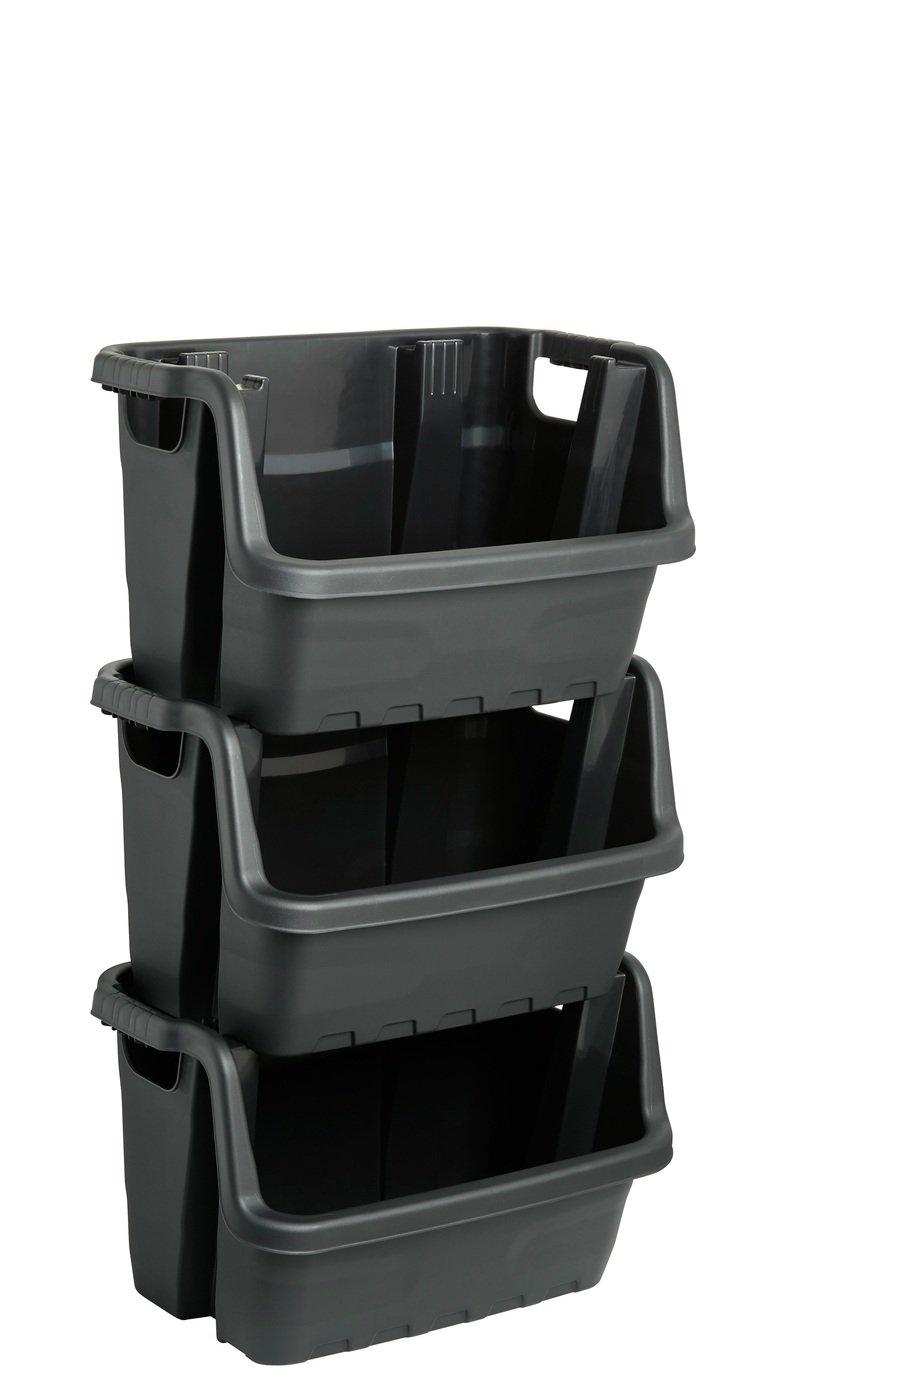 Strata 55 Litre Heavy Duty Stacking Crate - Set of 3